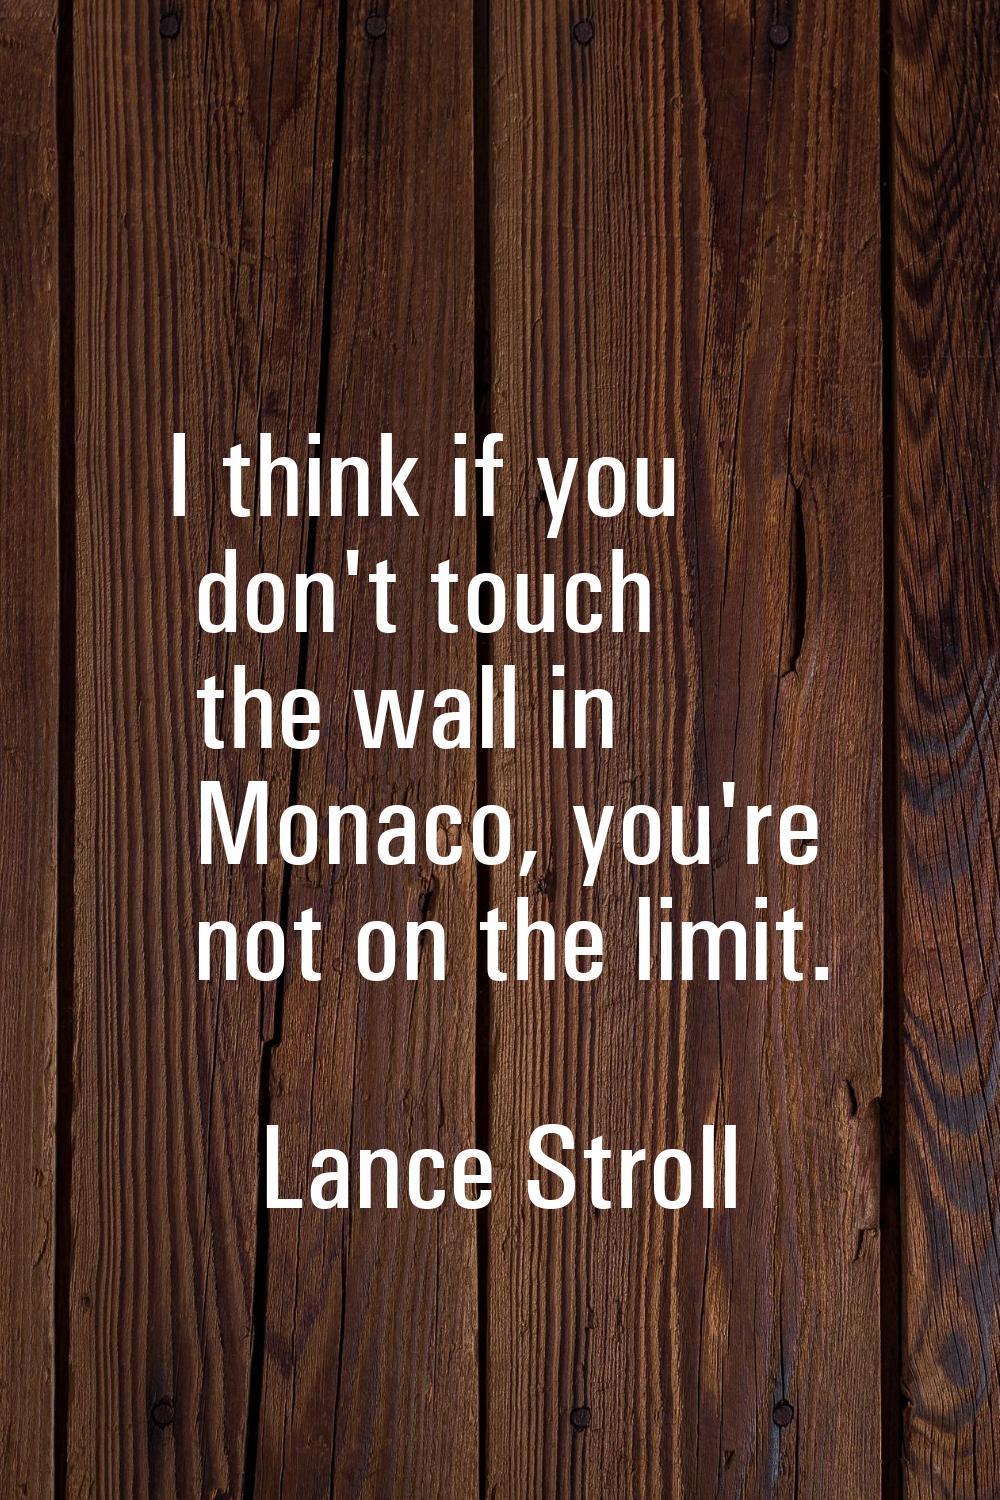 I think if you don't touch the wall in Monaco, you're not on the limit.